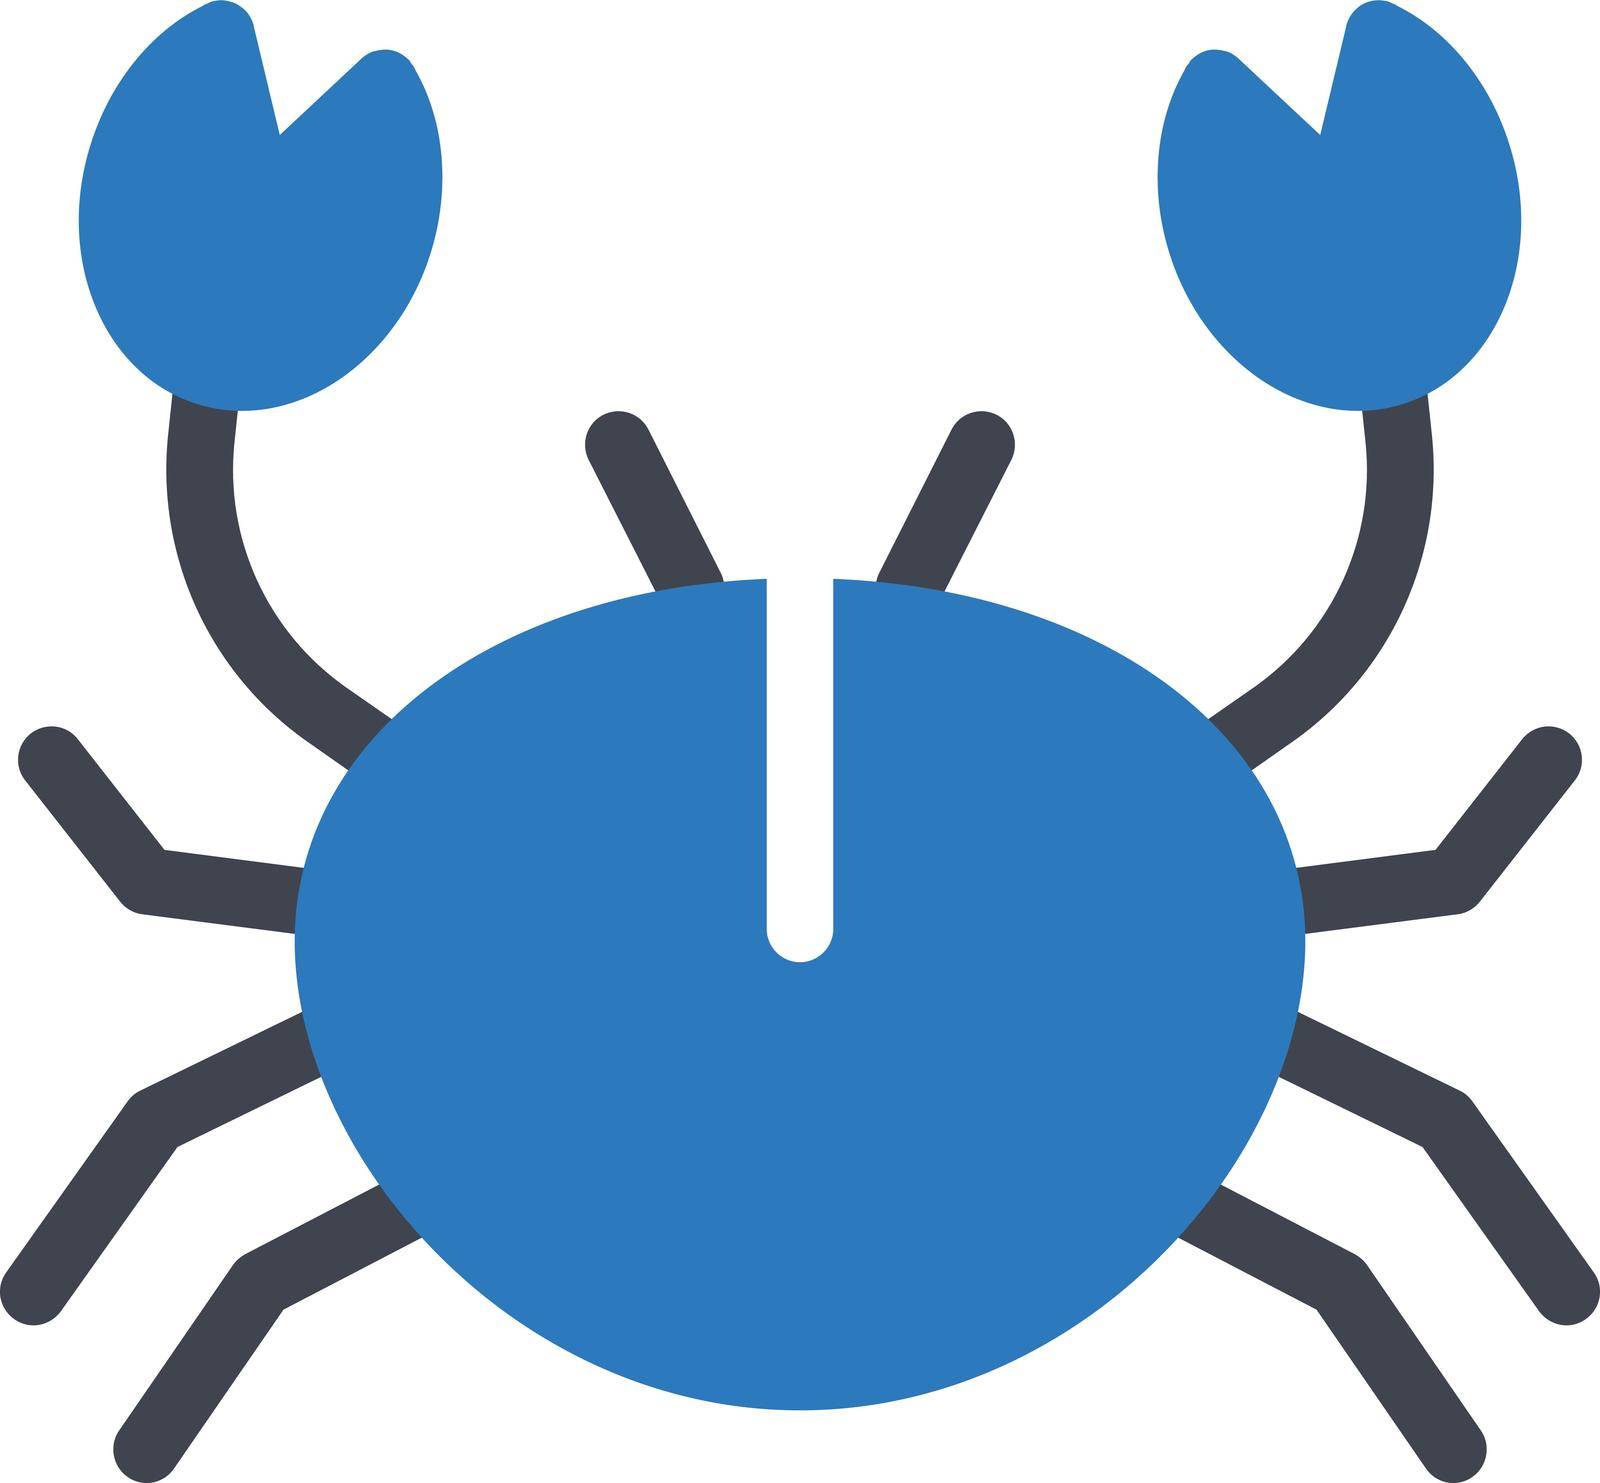 crab Vector illustration on a transparent background. Premium quality symmbols. Glyphs vector icons for concept and graphic design.